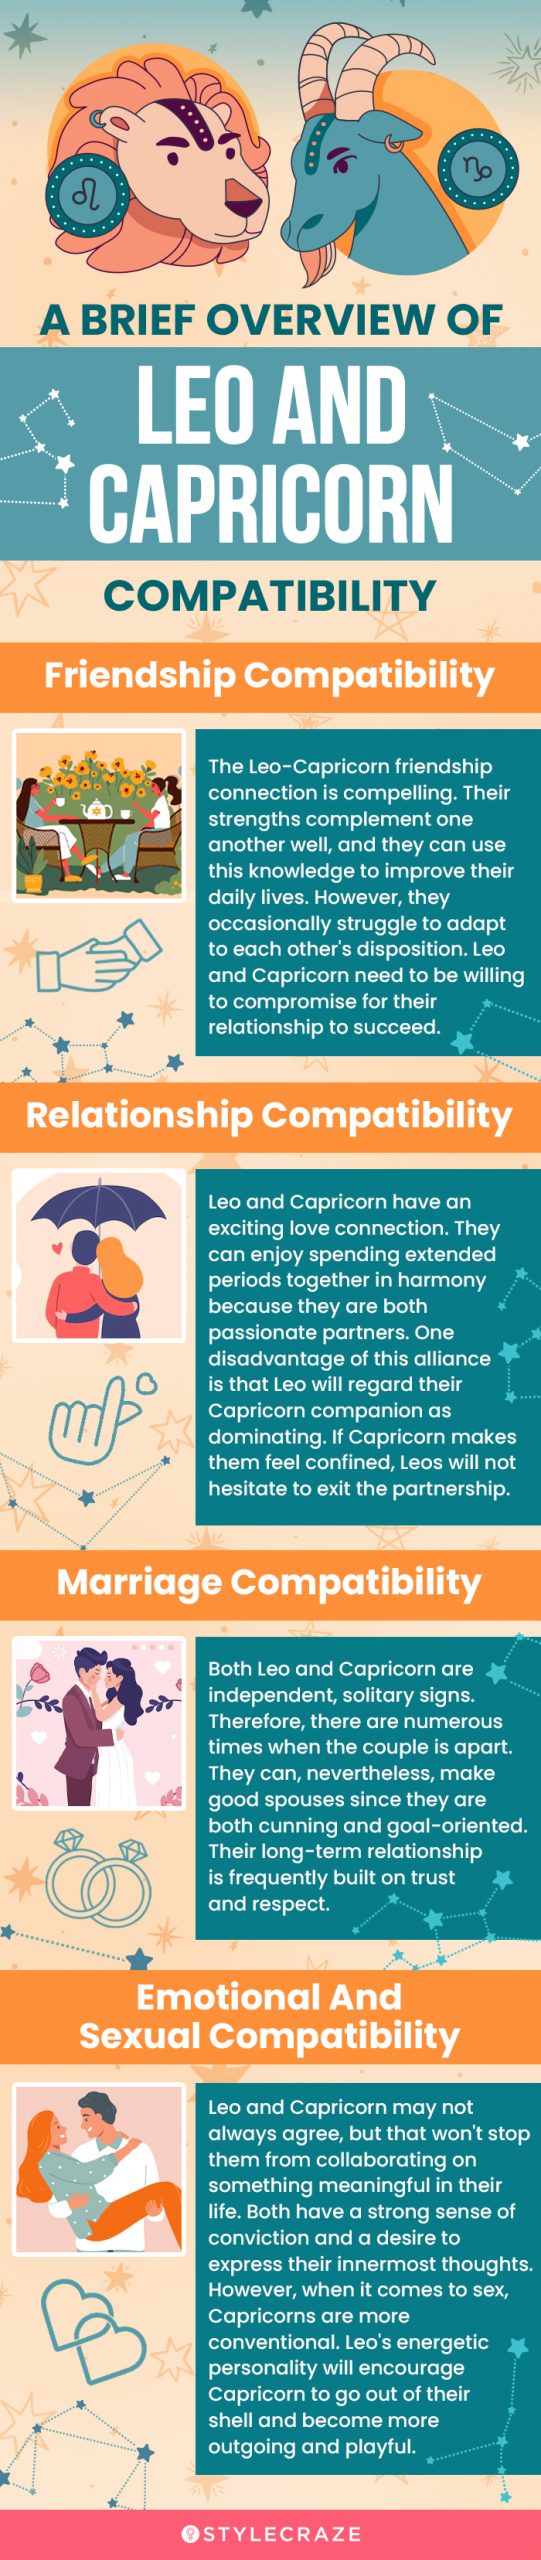 a brief overview of leo and capricorn compatibility [infographic]